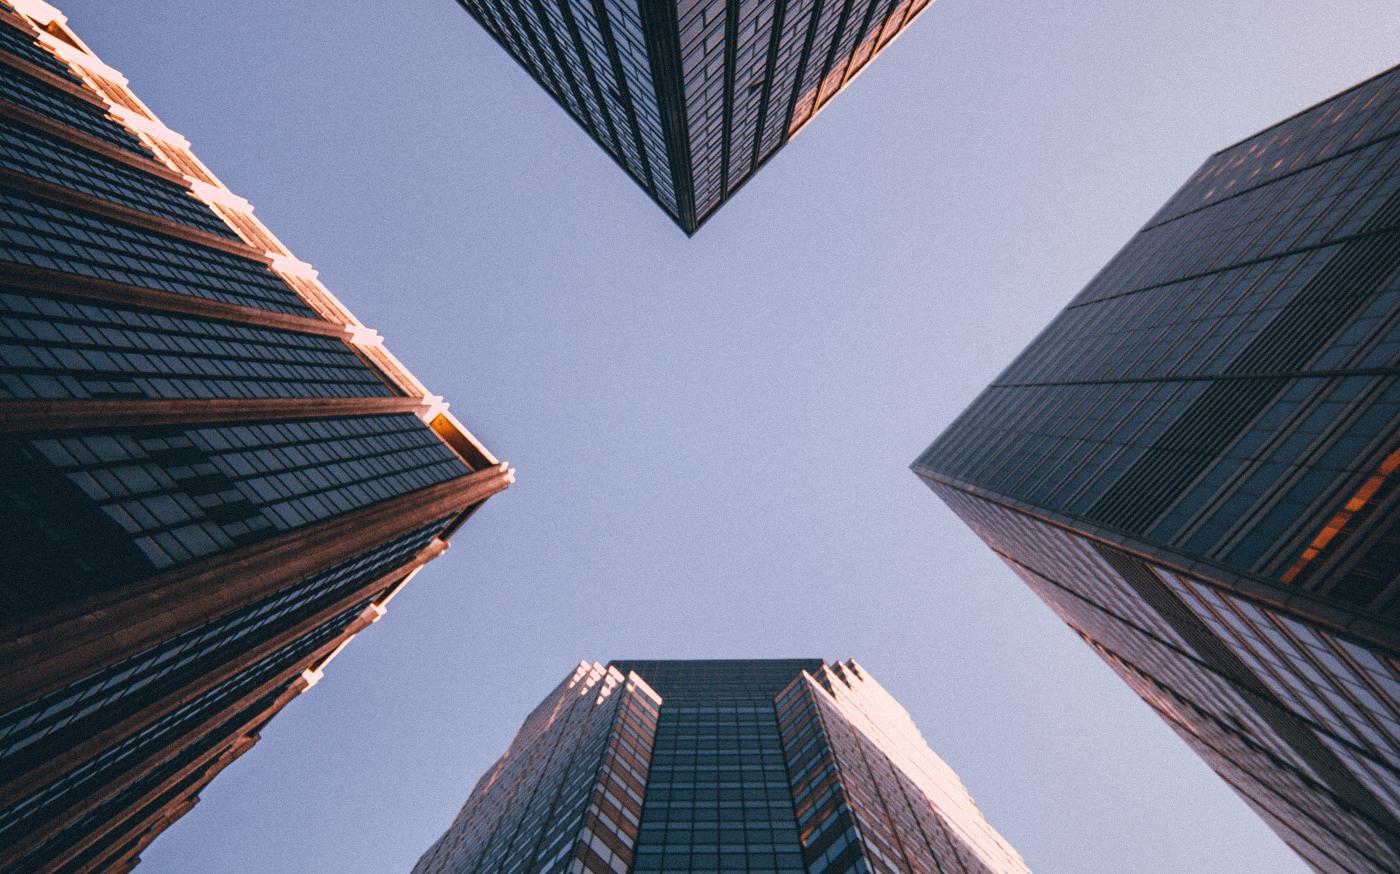 low-angle photography of four high-rise buildings by Kevin Matos courtesy of Unsplash.